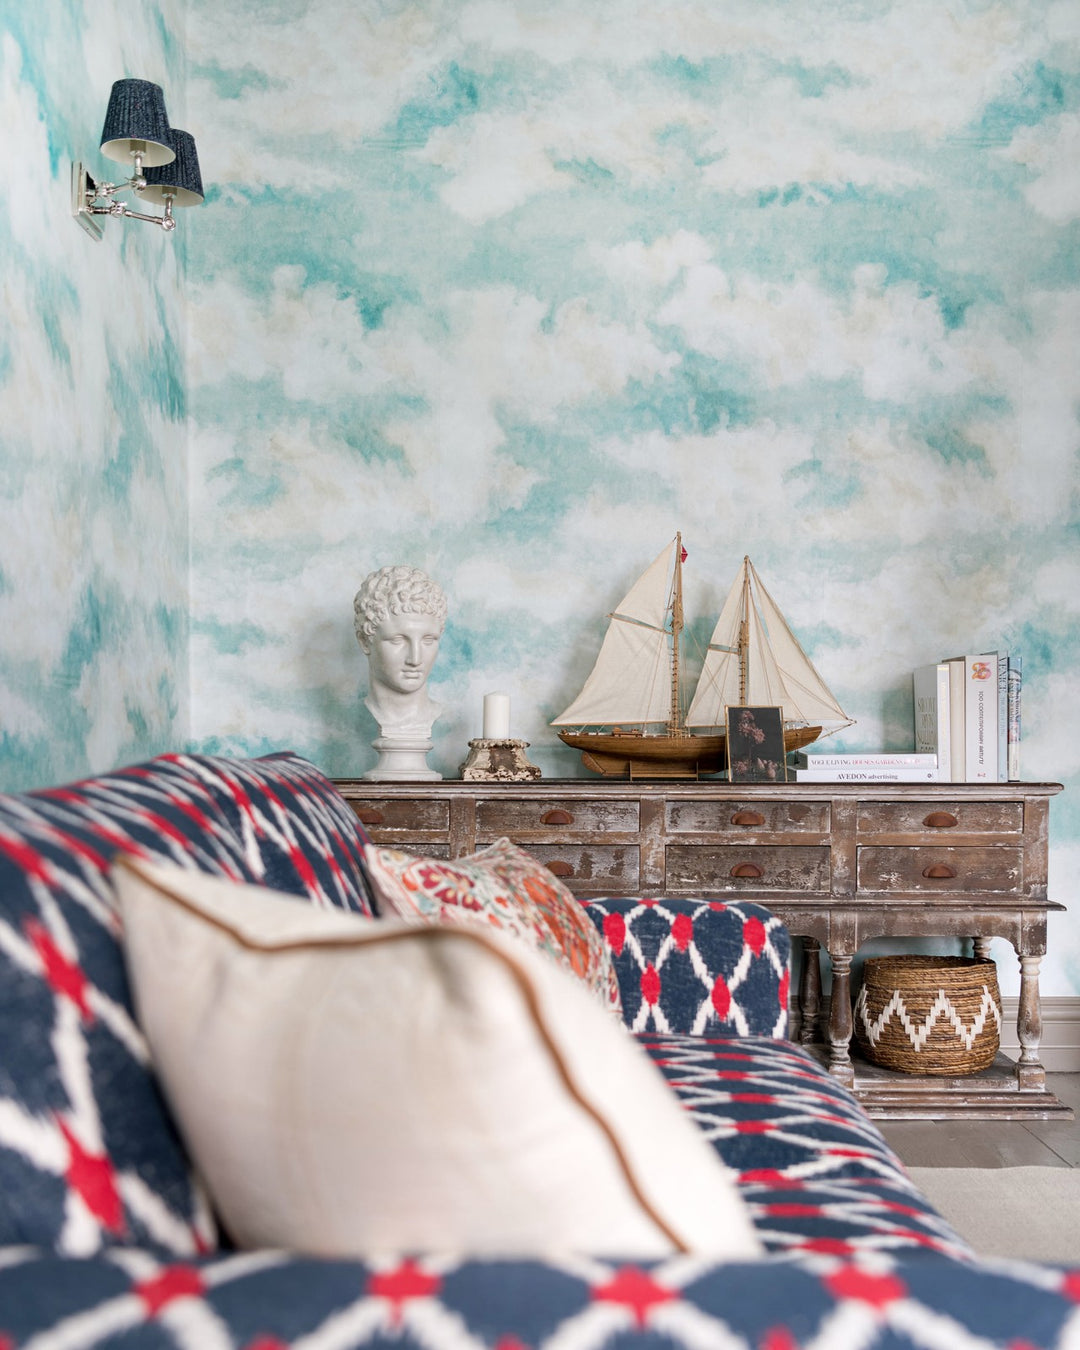 Mind-the-Gap-orient-express-collection-nouage-dreamlike-cloudy-sky-wallpaper-tranquil-dreamy-fluffy-cloud-ceiling-floating-turquoise-WP20789